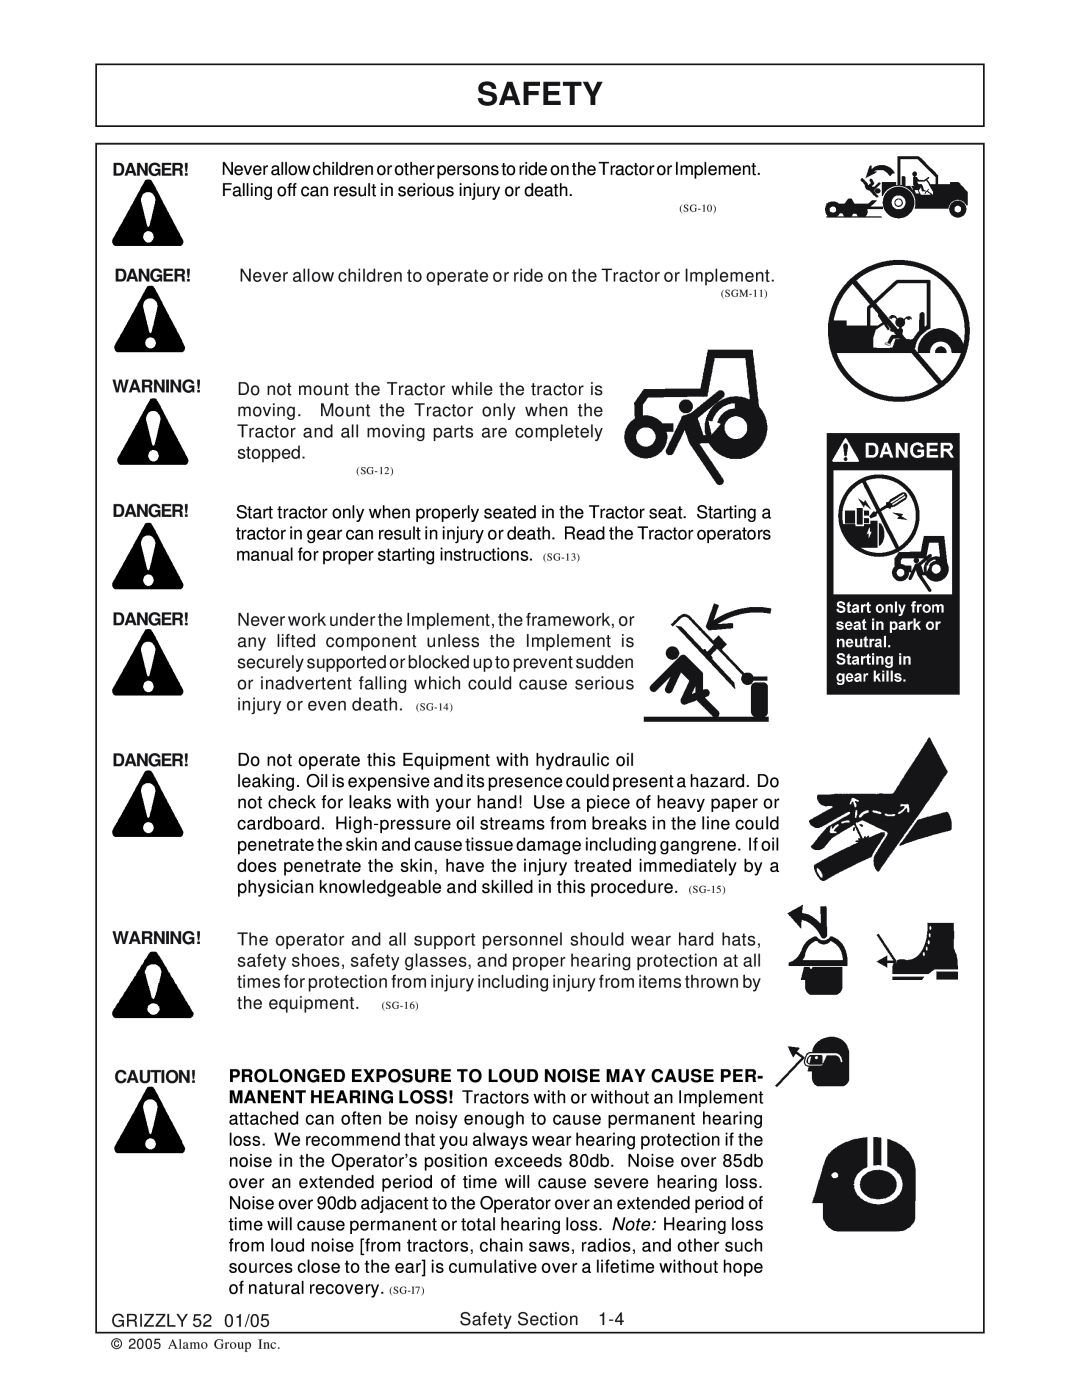 Grizzly 52 manual Safety, Danger Danger 